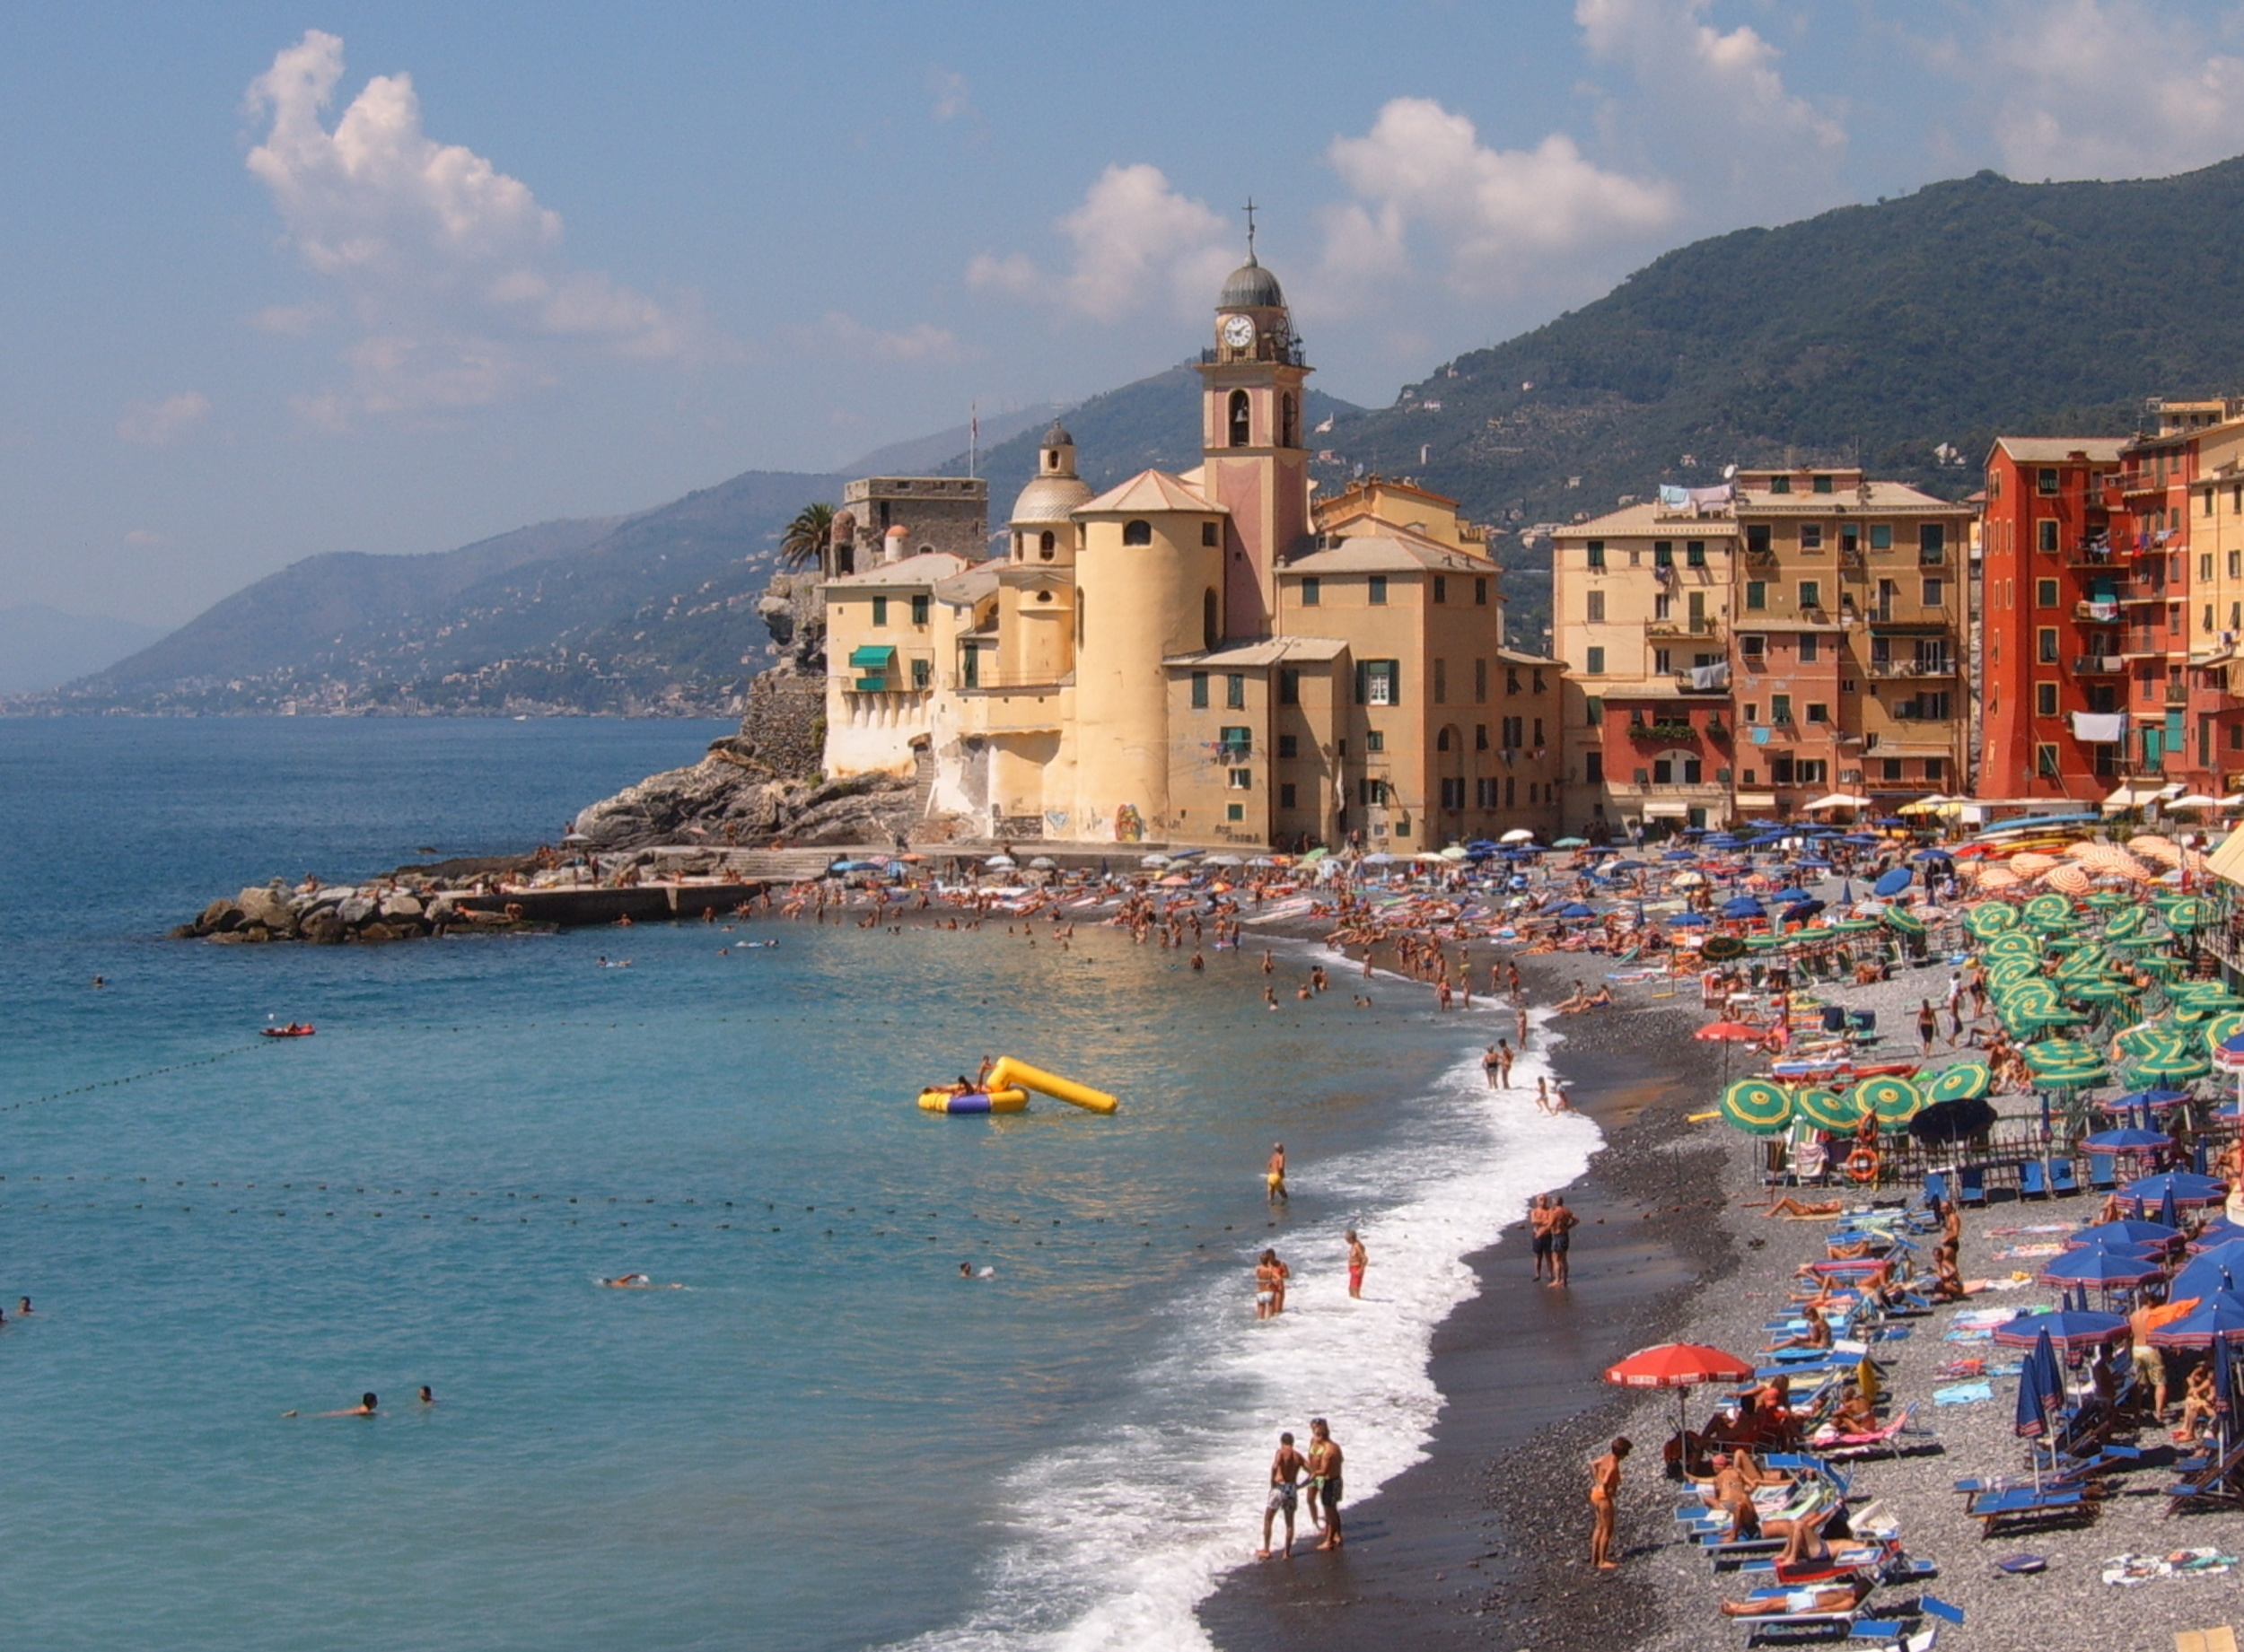 <p>Camogli is a beautiful town just north of the Riviera, but what truly sets this destination apart is the lack of tourists. 30 minutes north, and the beaches are packed with them. Here you get the same Mediterranean charm without the noise. </p><p><a href='https://www.msn.com/en-us/community/channel/vid-cj9pqbr0vn9in2b6ddcd8sfgpfq6x6utp44fssrv6mc2gtybw0us'>Follow us on MSN to see more of our exclusive lifestyle content.</a></p>